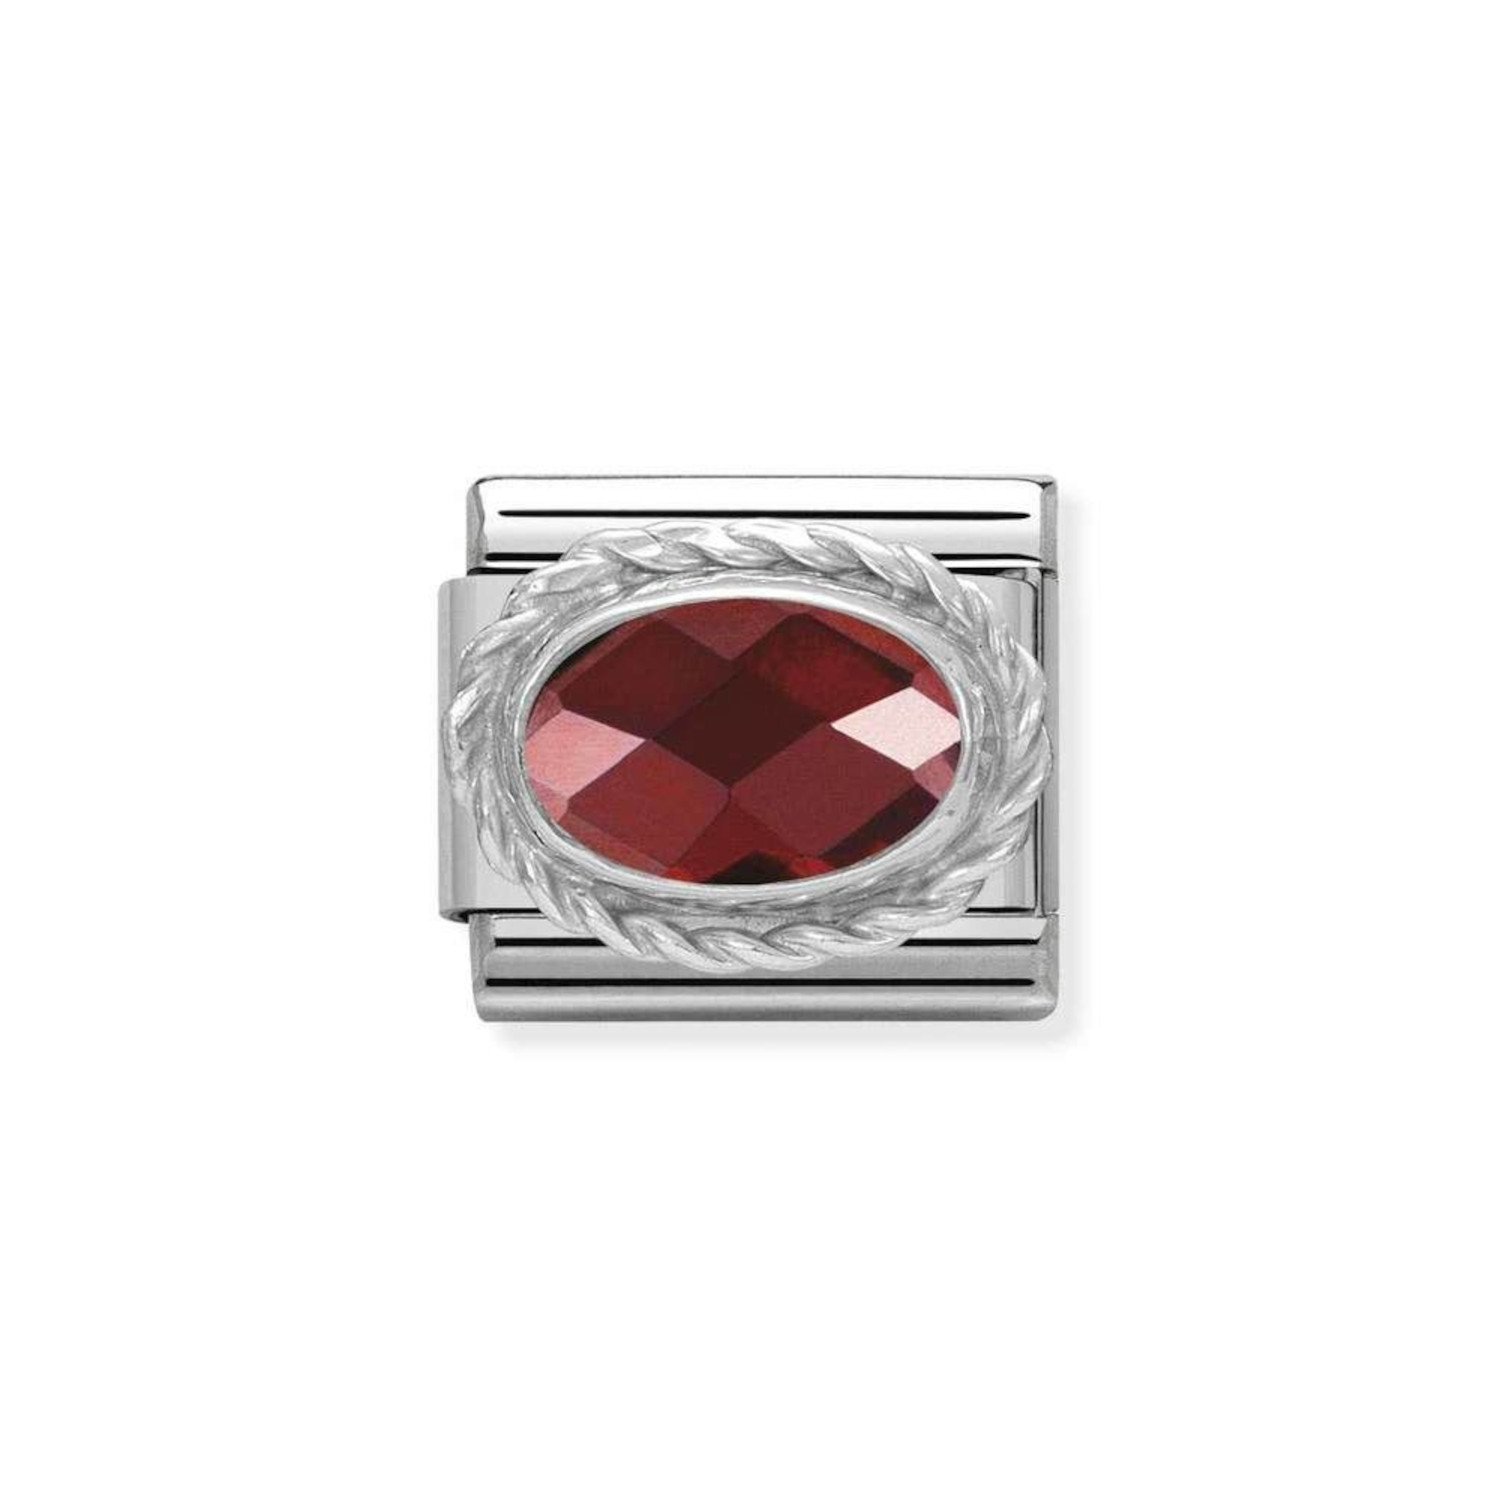 NOMINATION COMPOSABLE CLASSIC LINK IN STERLING SILVER WITH FACETED RED STONE 330604/005